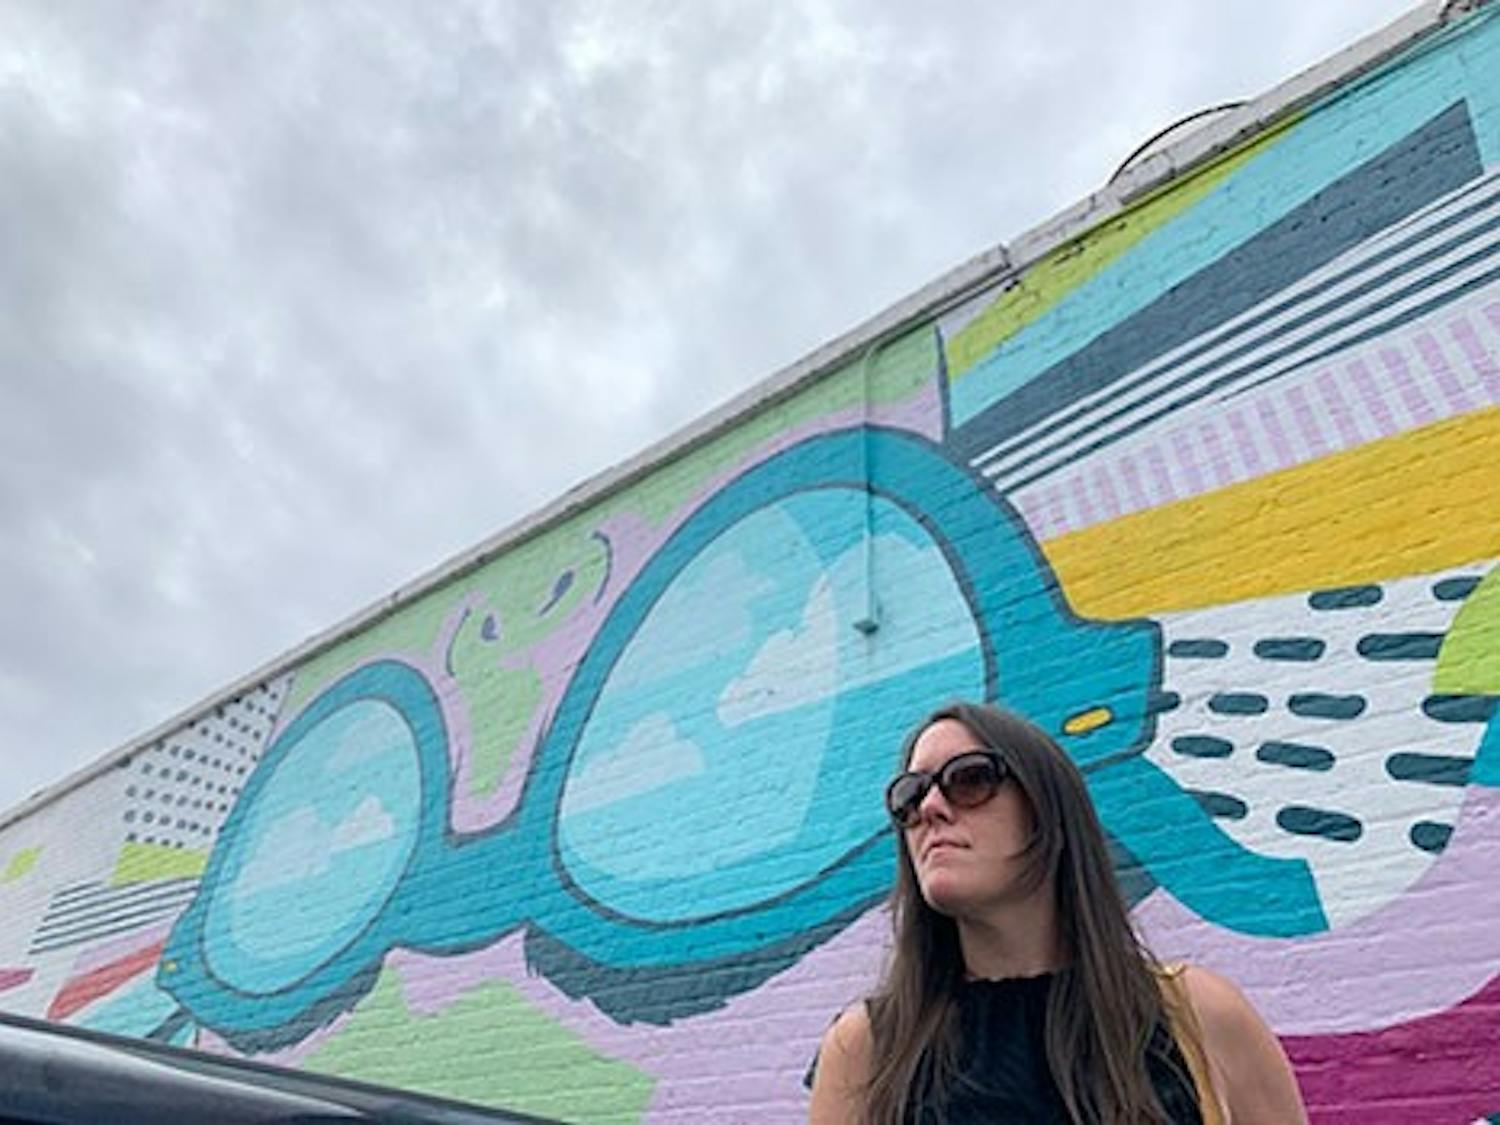 Freelance artist Cait Maloney stands in front of her mural "Lady Vista" located on the wall of Boku Kitchen and Saloon in Columbia, SC.